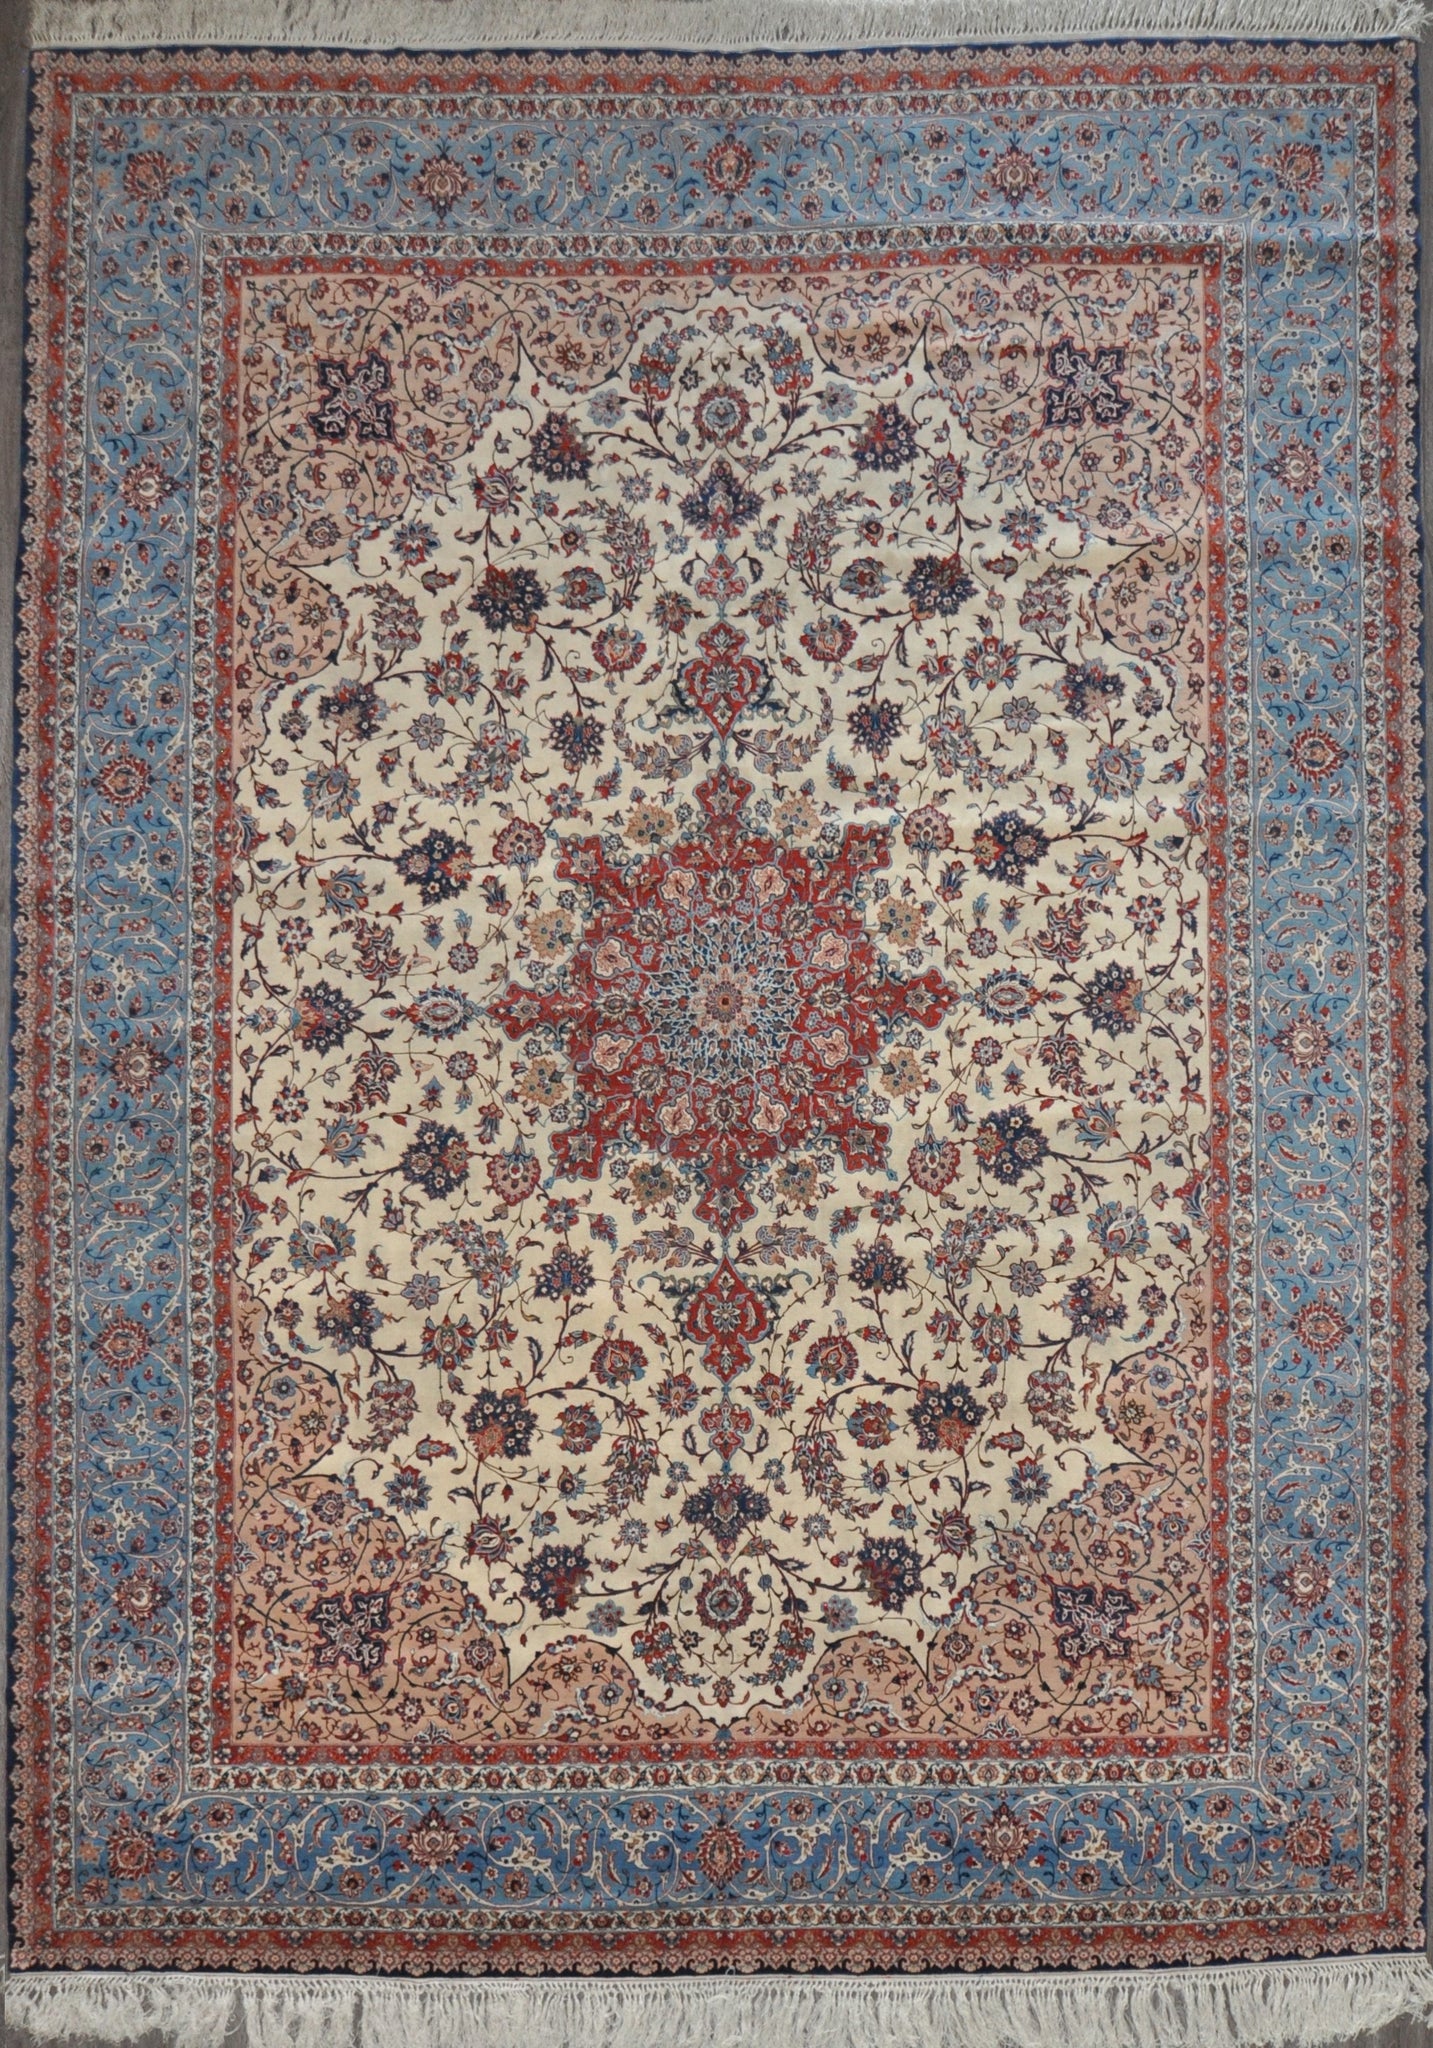 9.9x13.0 Antique Persian esfahan med ant #96416